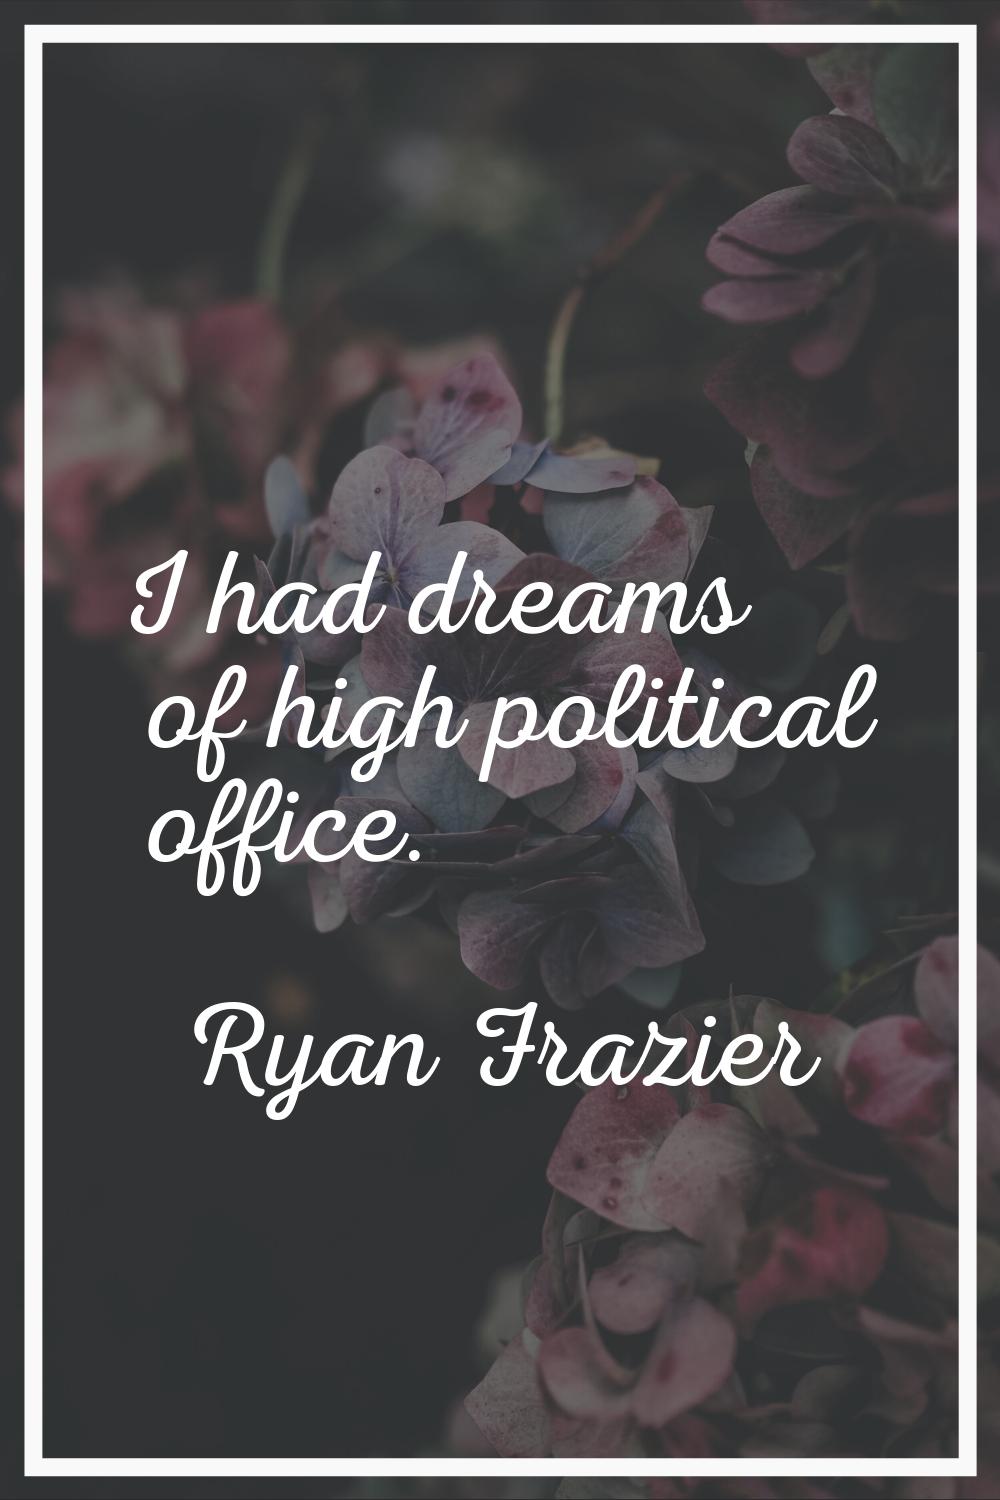 I had dreams of high political office.